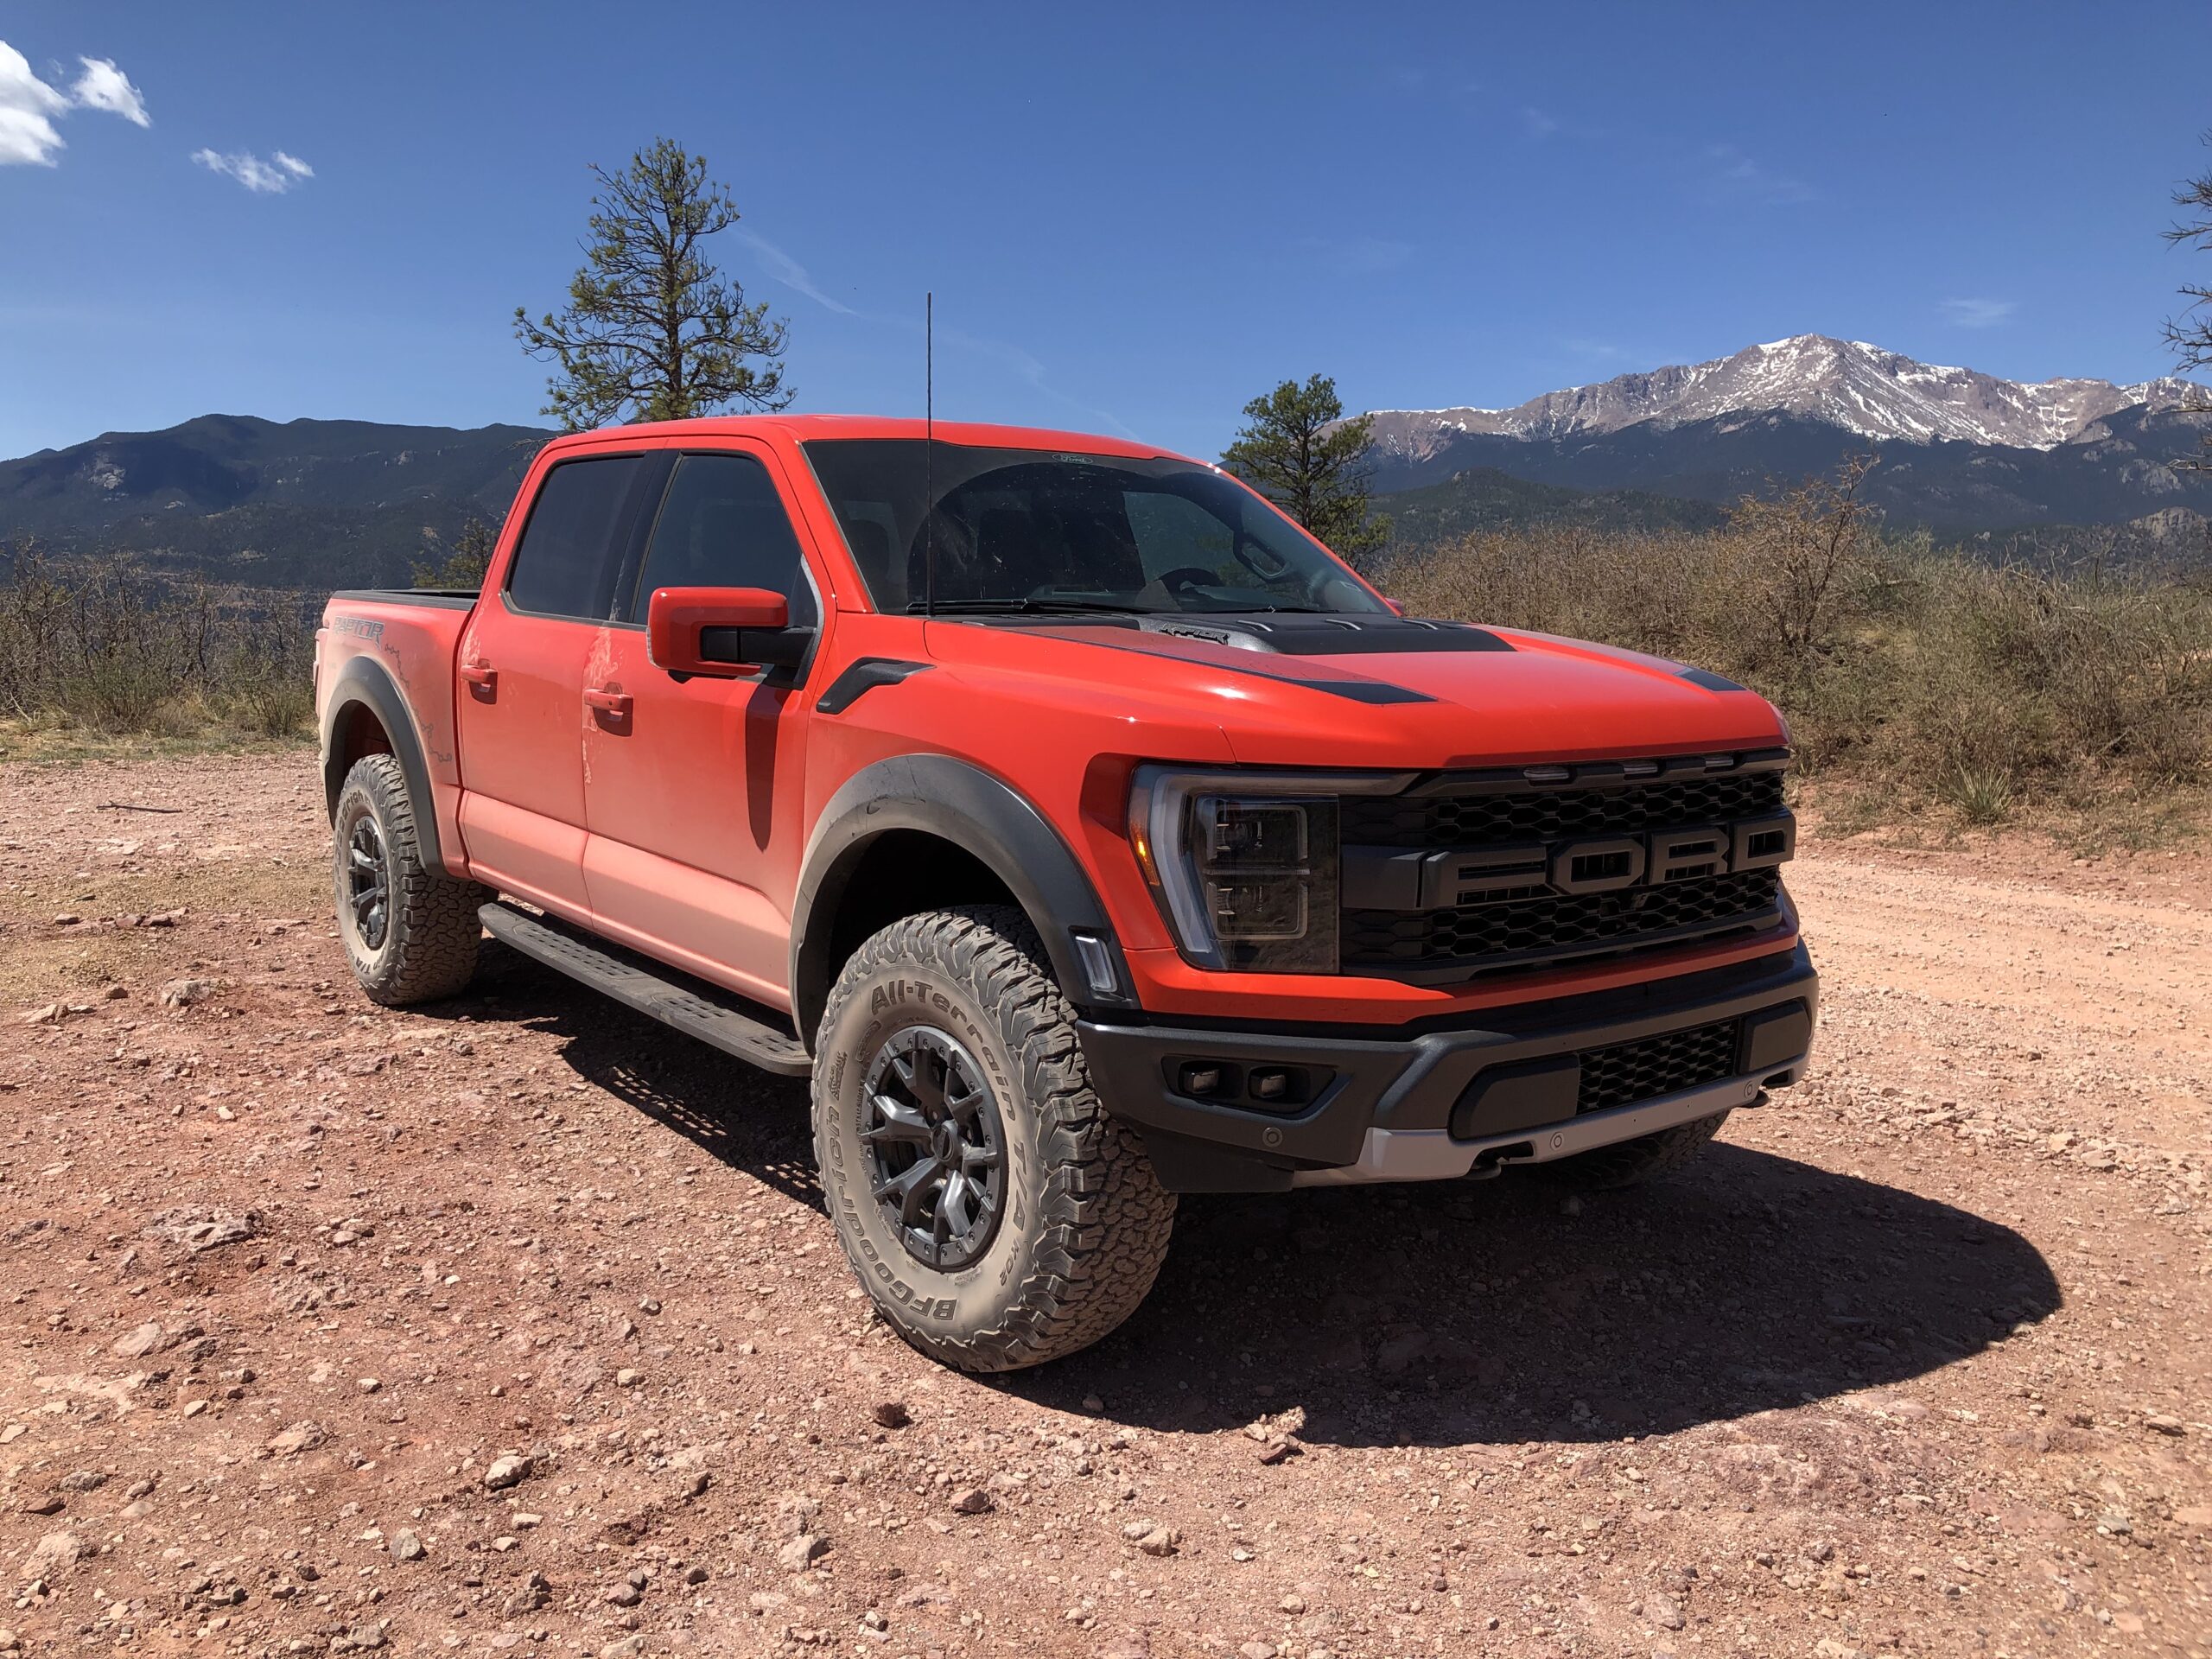 The Ford F-150 Raptor.